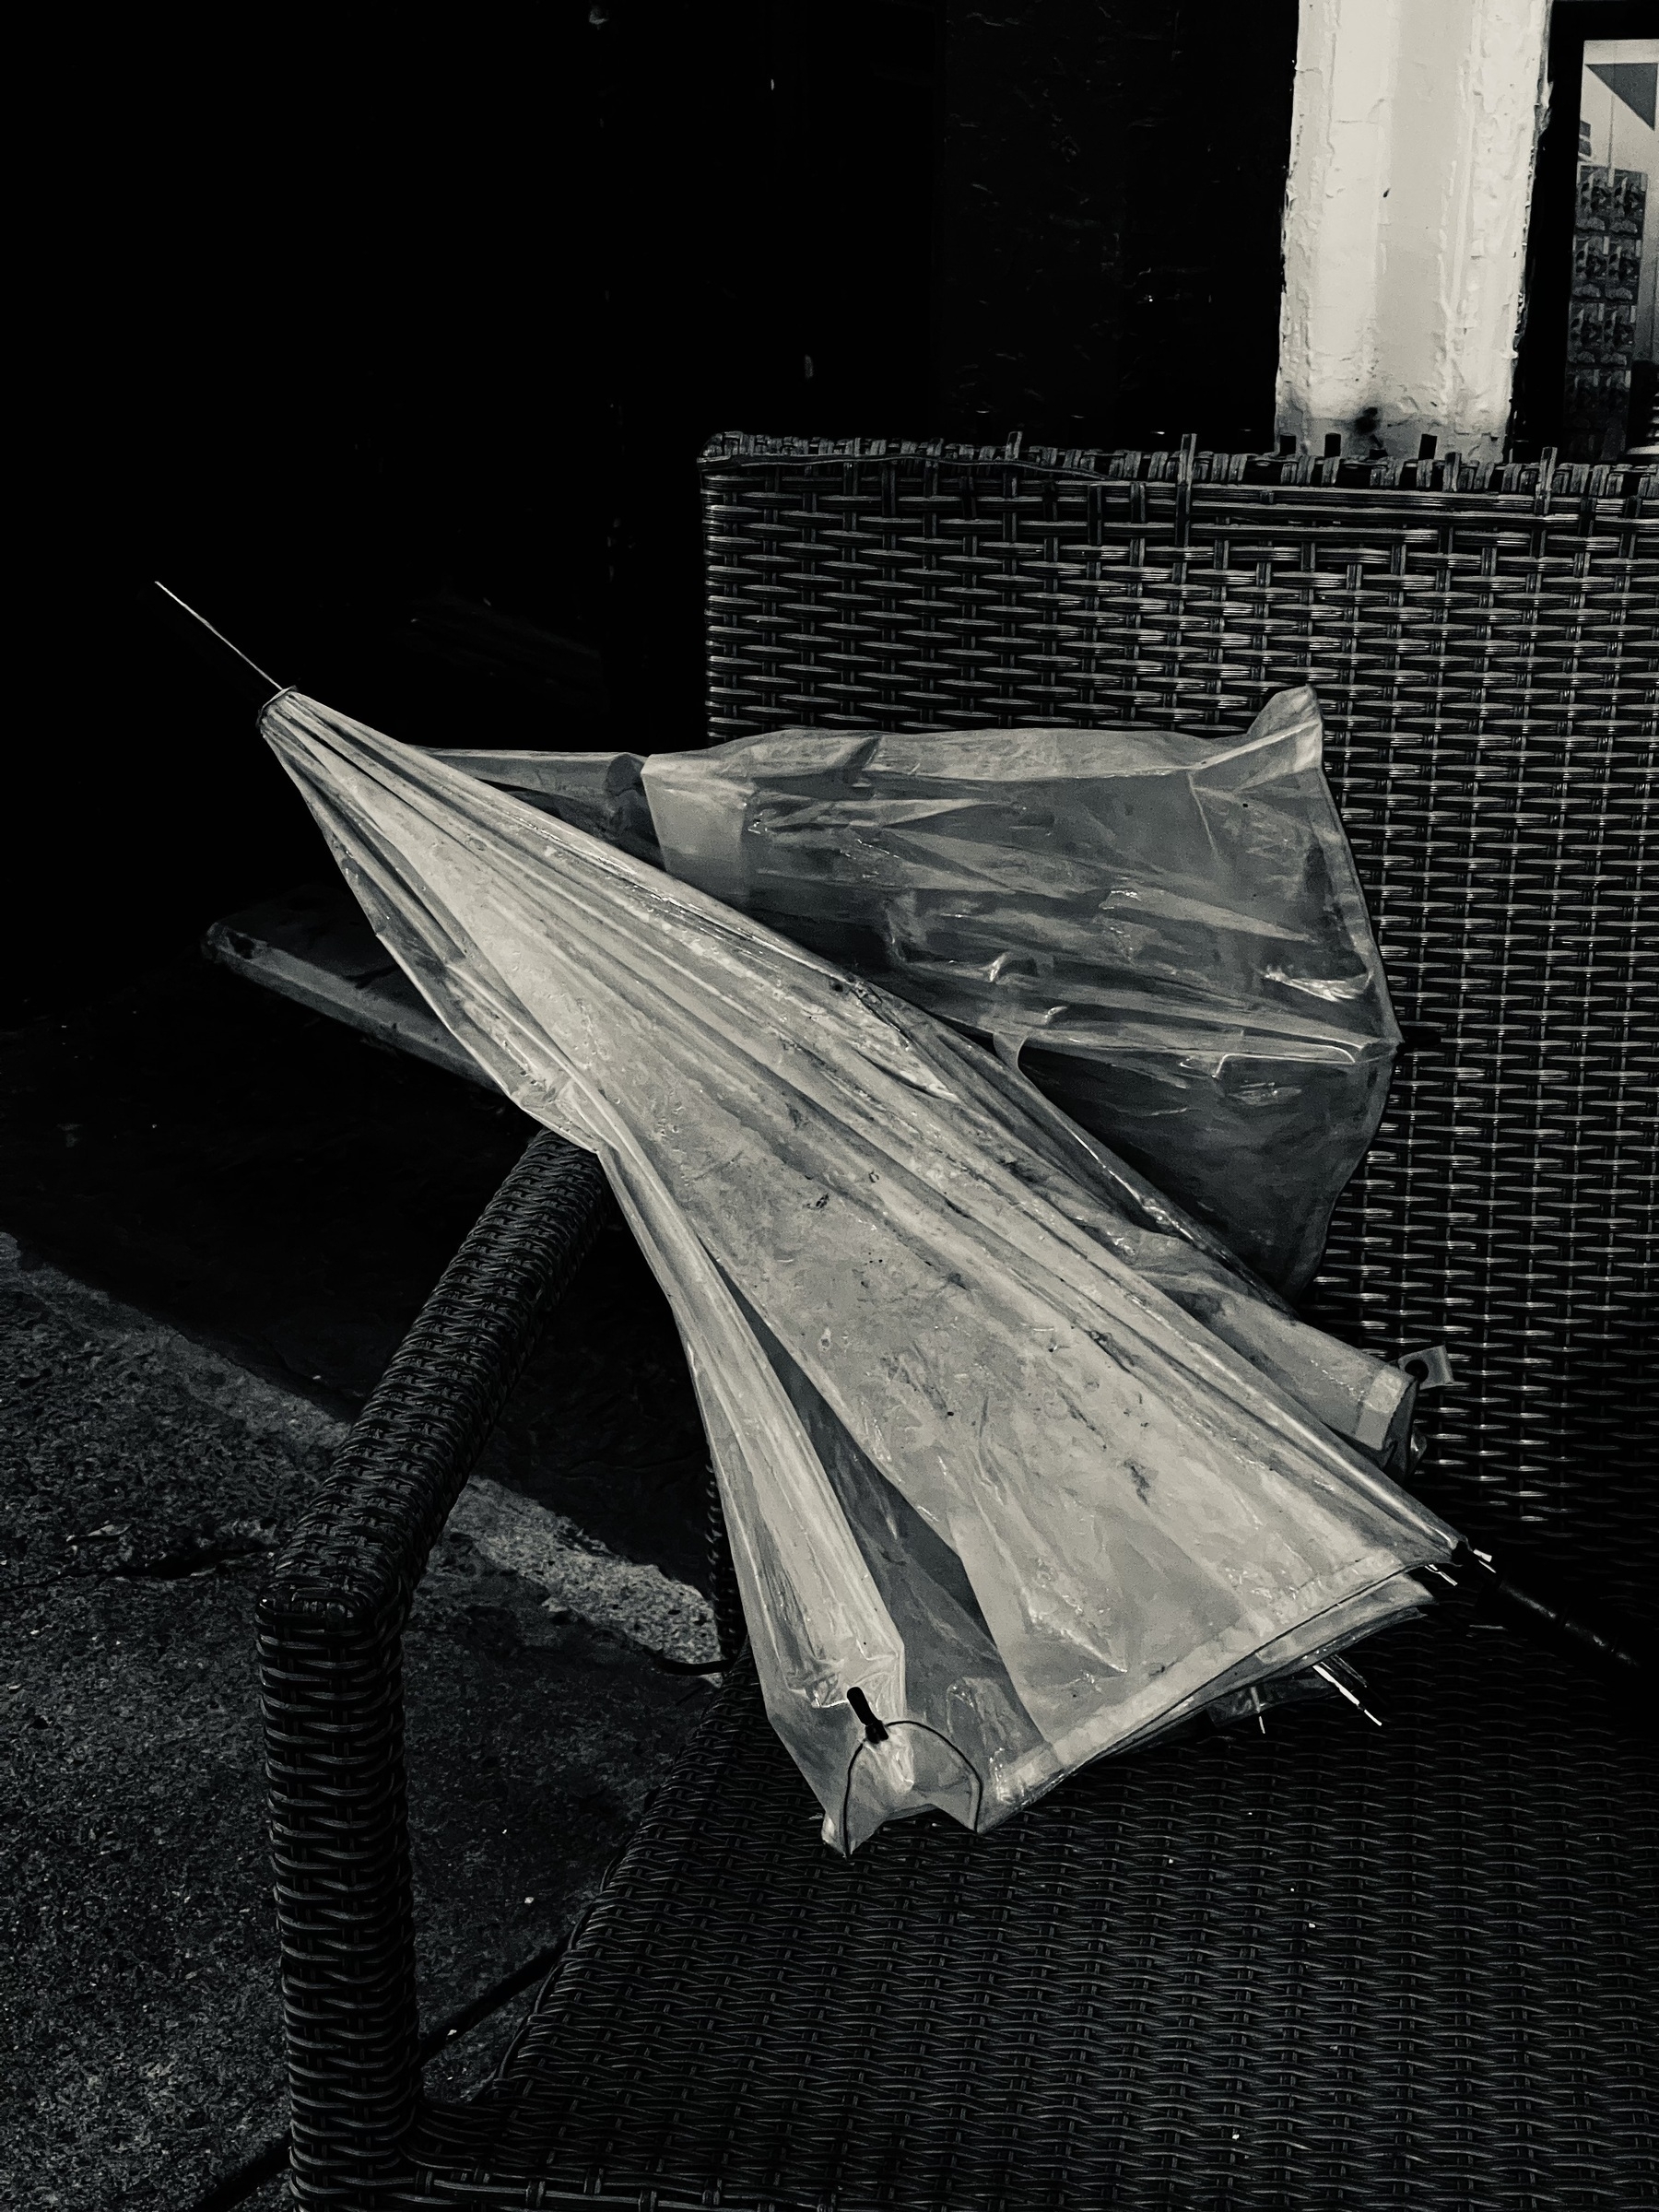 Transparent, folded, umbrella on a wicker chair.